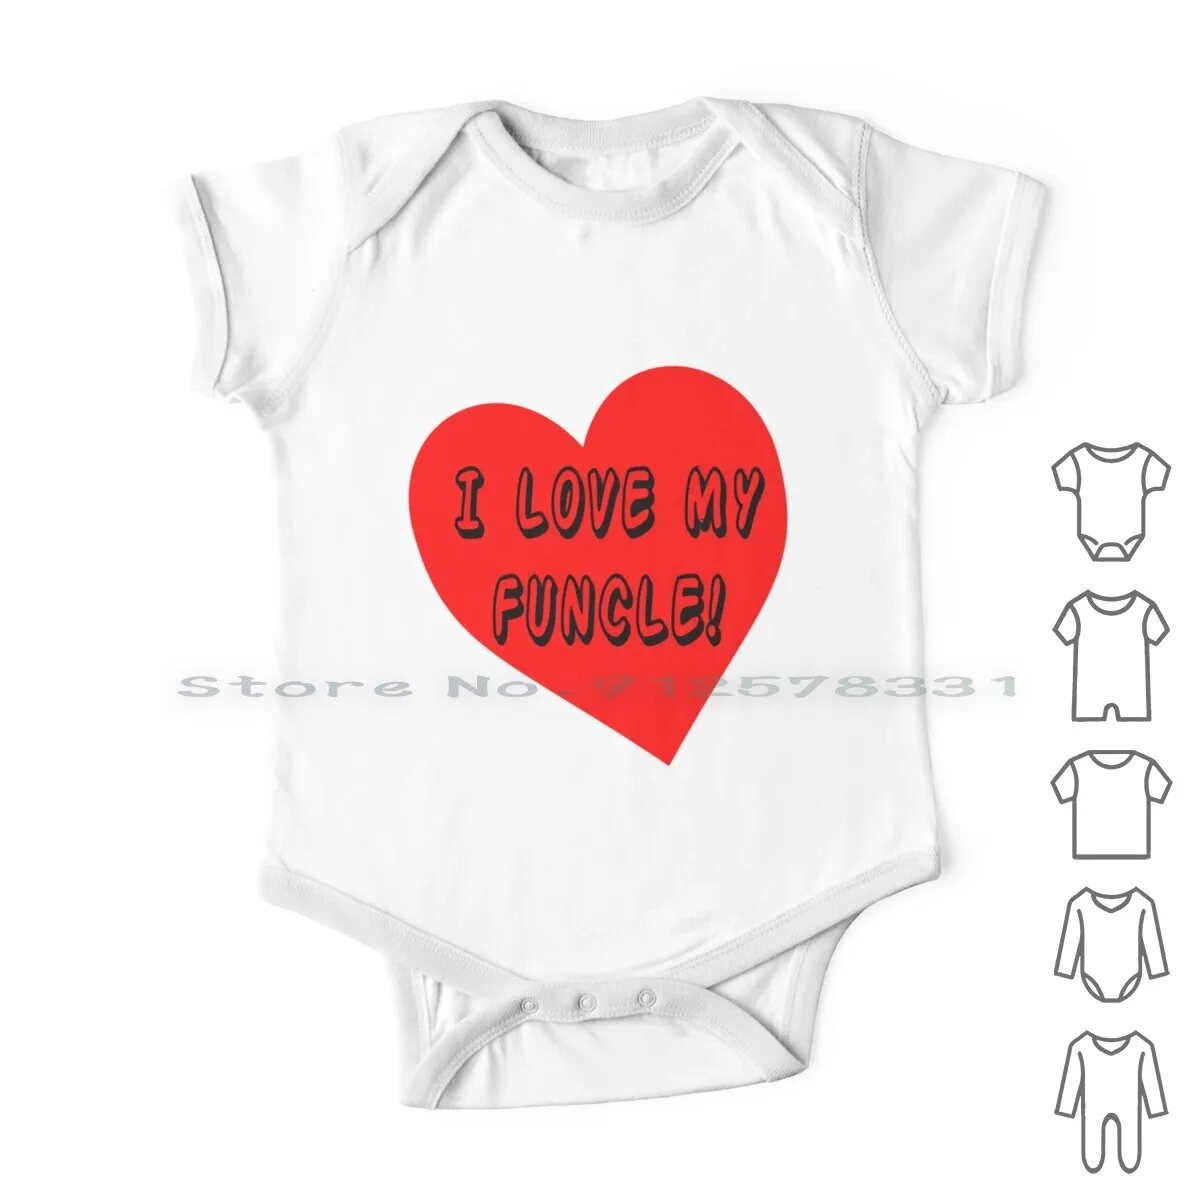 I Love My Funcle , Fun Shirt! Show Some Love! Newborn Baby Clothes Rompers Cotton Jumpsuits Family Funcle Niece Nephew Birthday